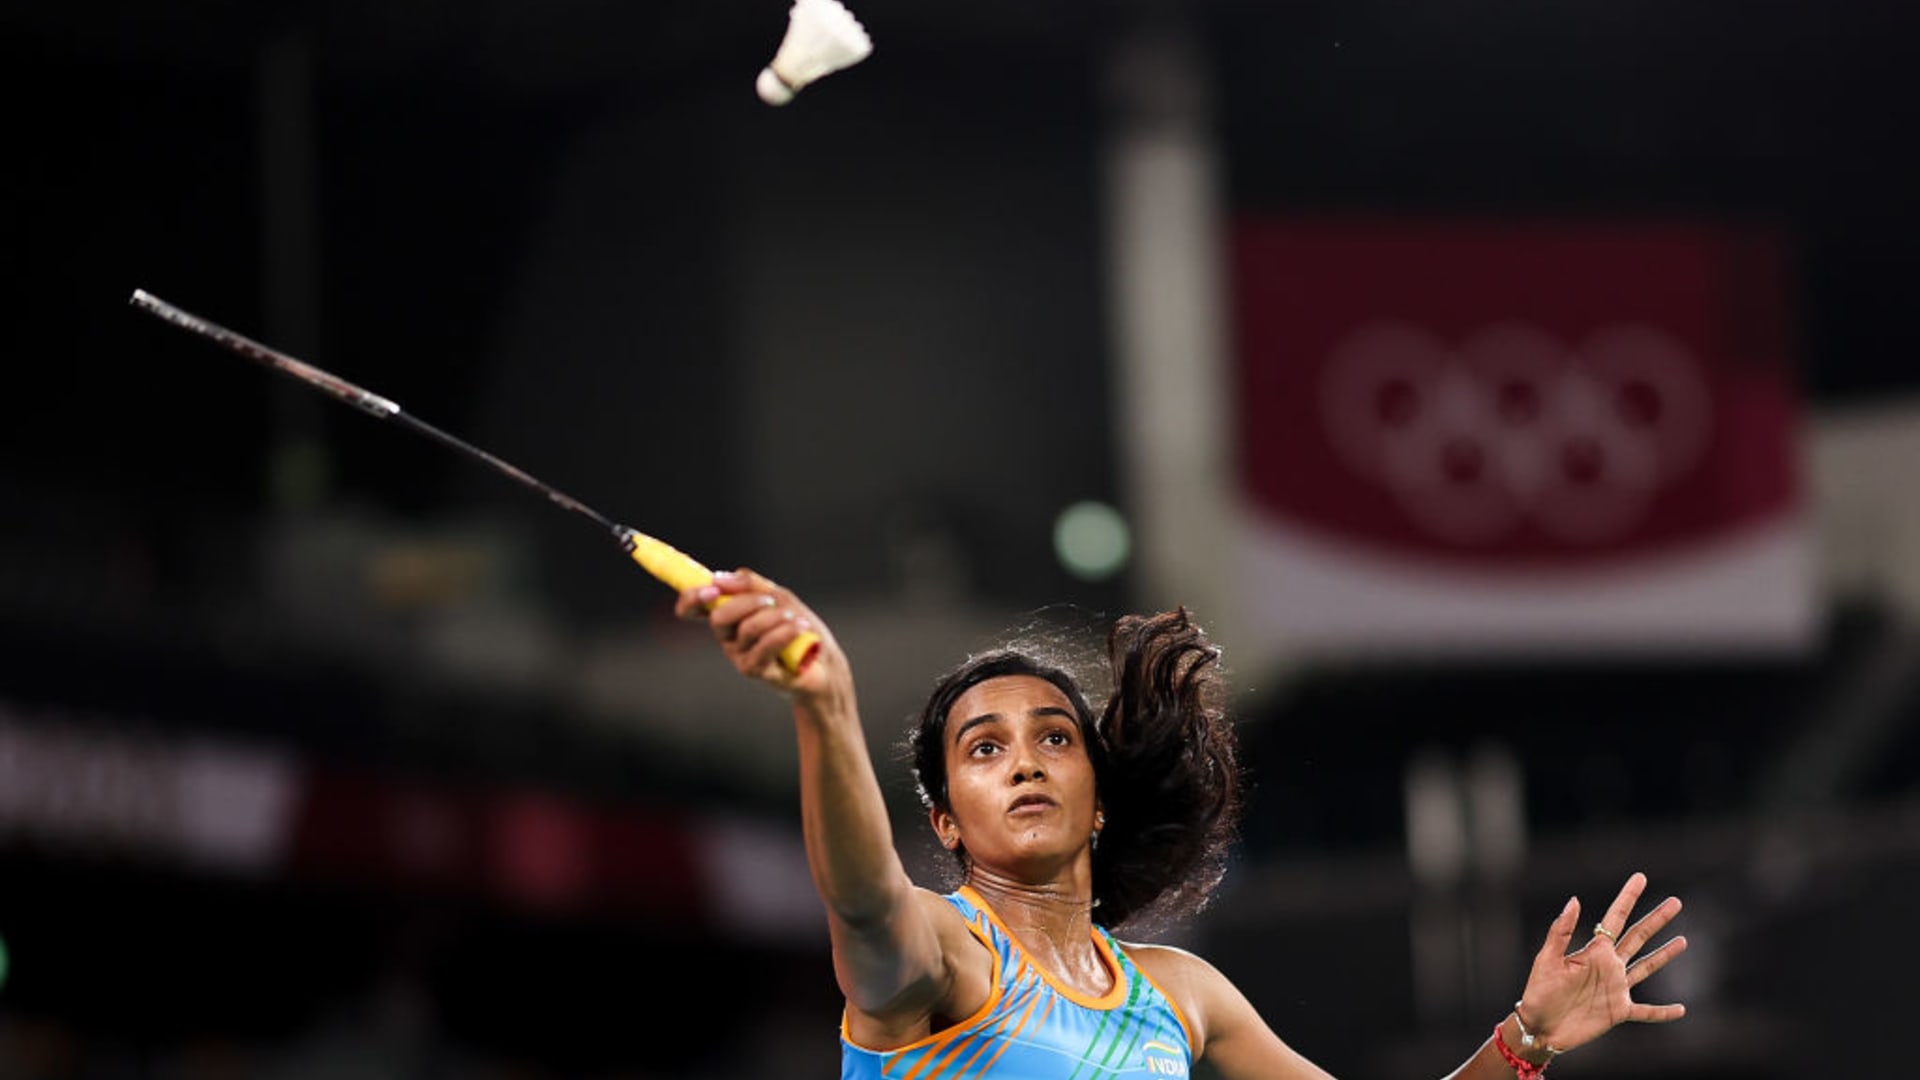 Working hard on my mental strength PV Sindhu chimes after reaching the knockout stages at Tokyo 2020